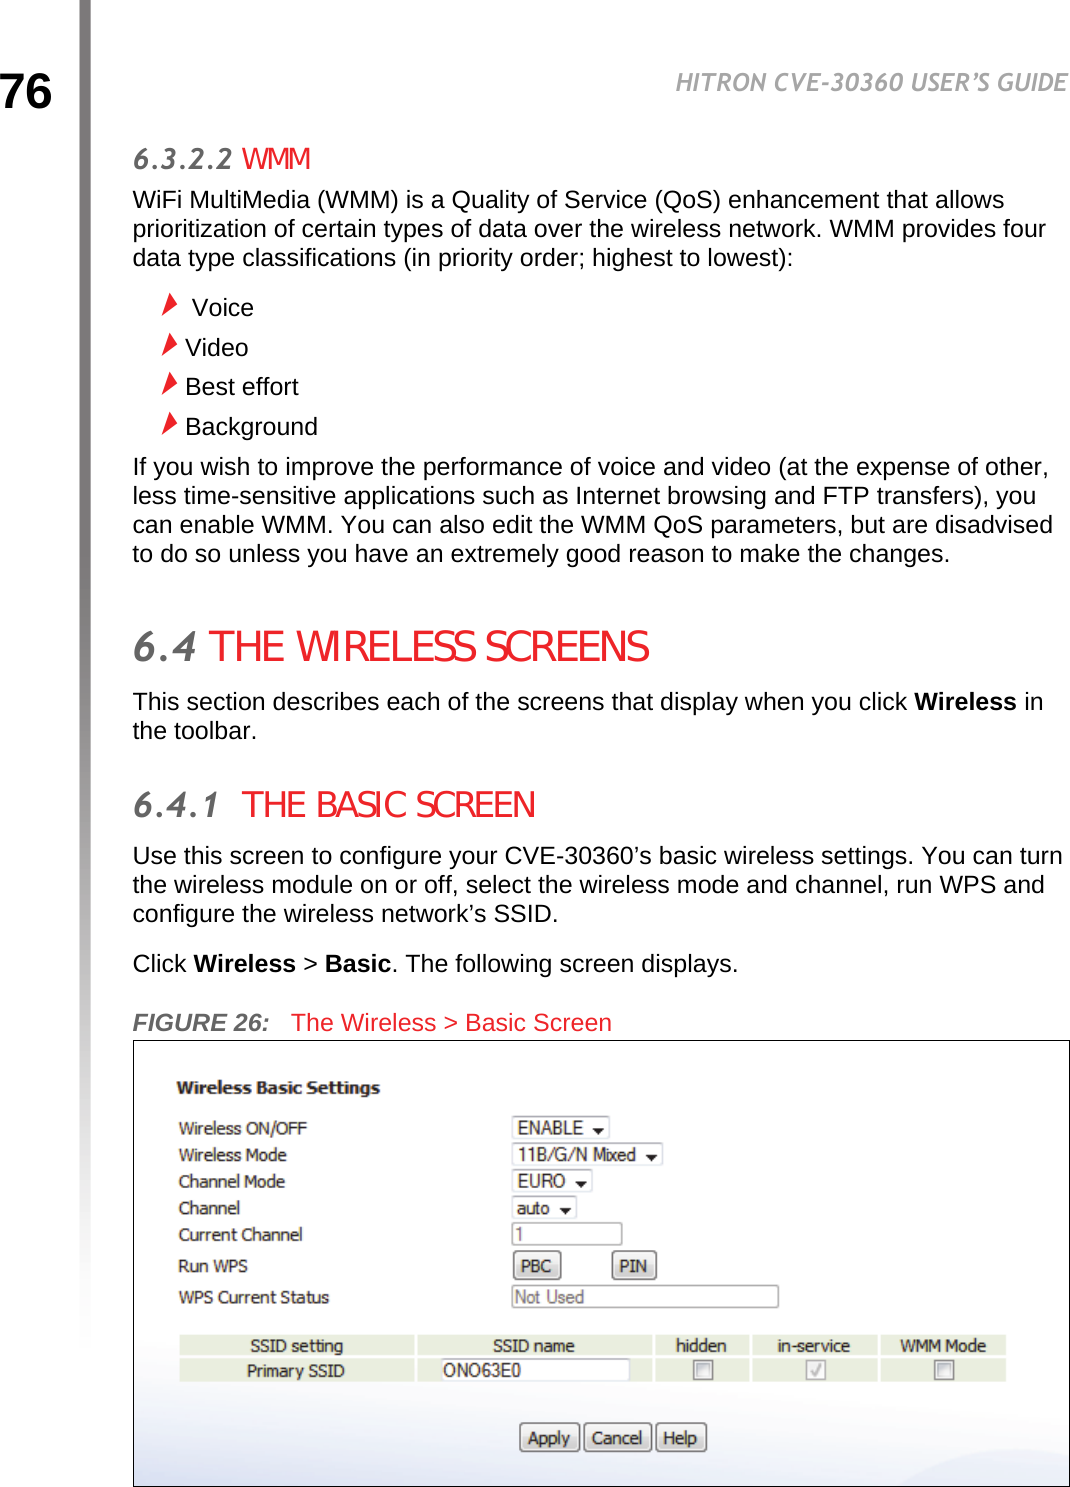 76HITRON CVE-30360 USER’S GUIDEWIRELESS6.3.2.2 WMMWiFi MultiMedia (WMM) is a Quality of Service (QoS) enhancement that allows prioritization of certain types of data over the wireless network. WMM provides four data type classifications (in priority order; highest to lowest): VoiceVideoBest effortBackgroundIf you wish to improve the performance of voice and video (at the expense of other, less time-sensitive applications such as Internet browsing and FTP transfers), you can enable WMM. You can also edit the WMM QoS parameters, but are disadvised to do so unless you have an extremely good reason to make the changes.6.4 THE WIRELESS SCREENSThis section describes each of the screens that display when you click Wireless in the toolbar.6.4.1  THE BASIC SCREENUse this screen to configure your CVE-30360’s basic wireless settings. You can turn the wireless module on or off, select the wireless mode and channel, run WPS and configure the wireless network’s SSID.Click Wireless &gt; Basic. The following screen displays.FIGURE 26:   The Wireless &gt; Basic Screen